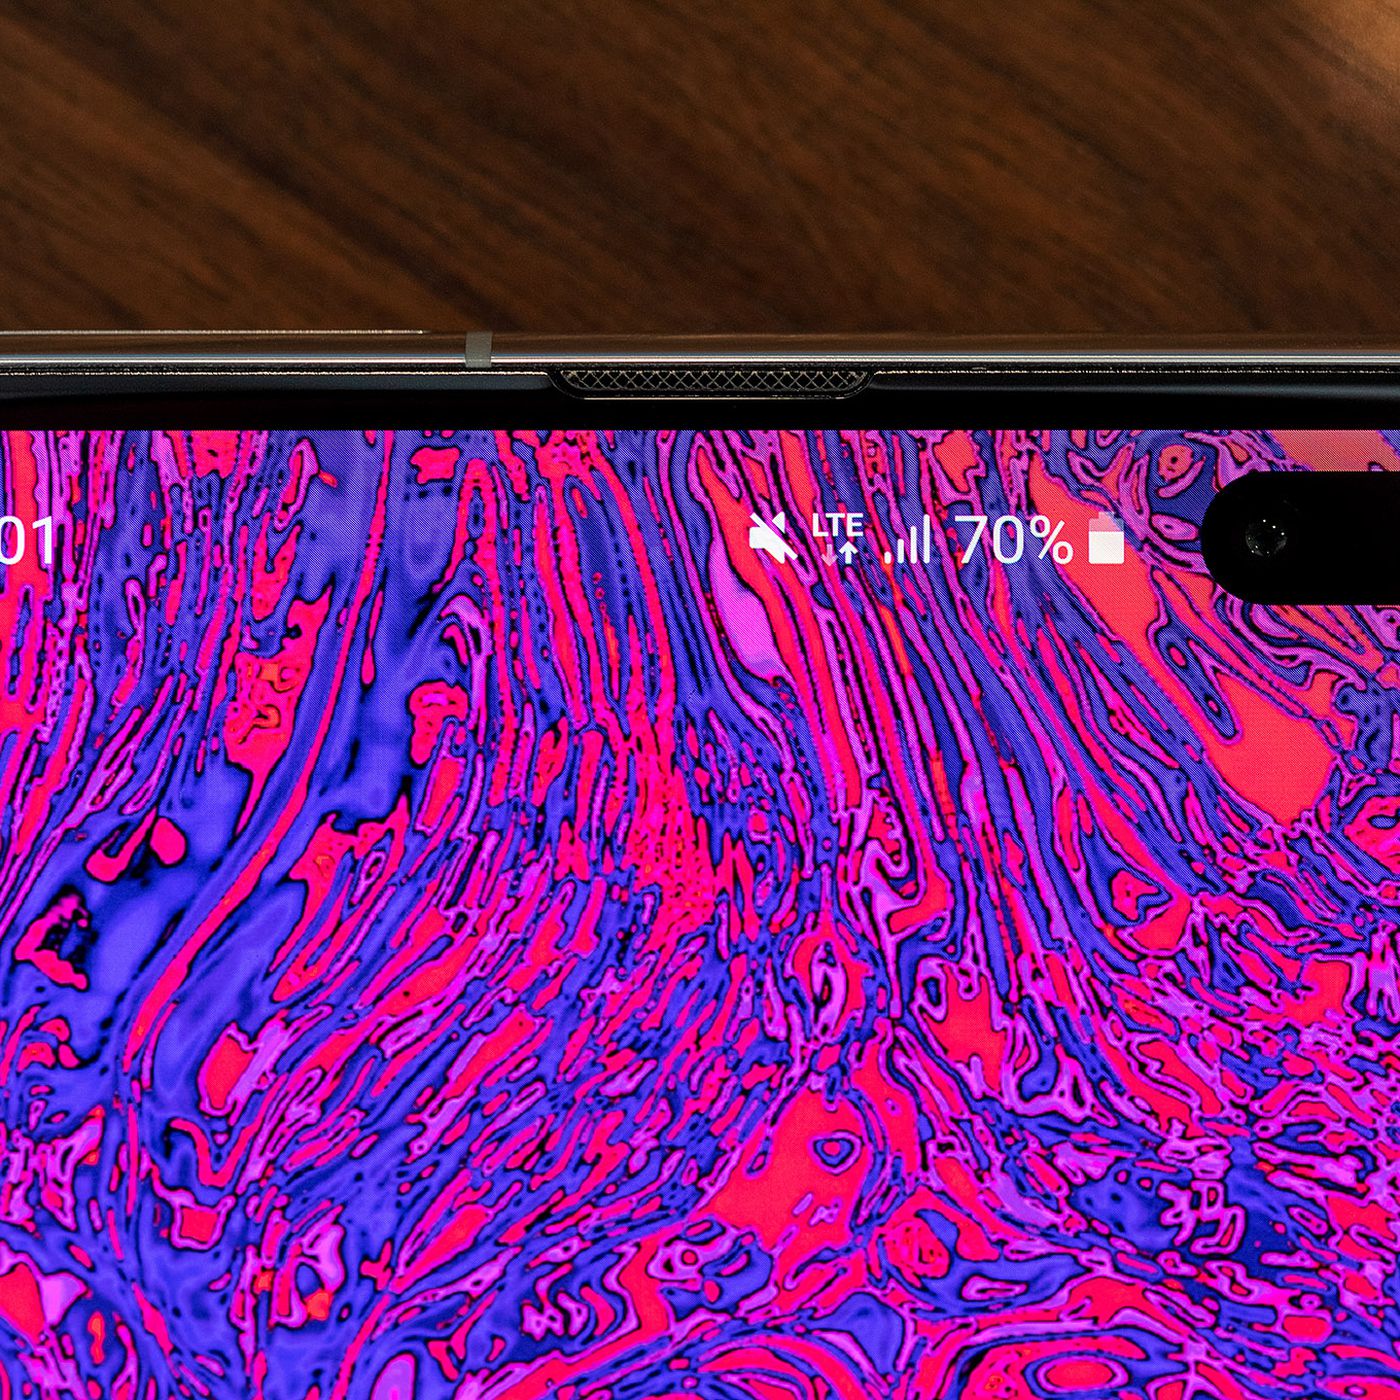 The Best Part Of The Galaxy S10 S Hole Punch Is The Potential For